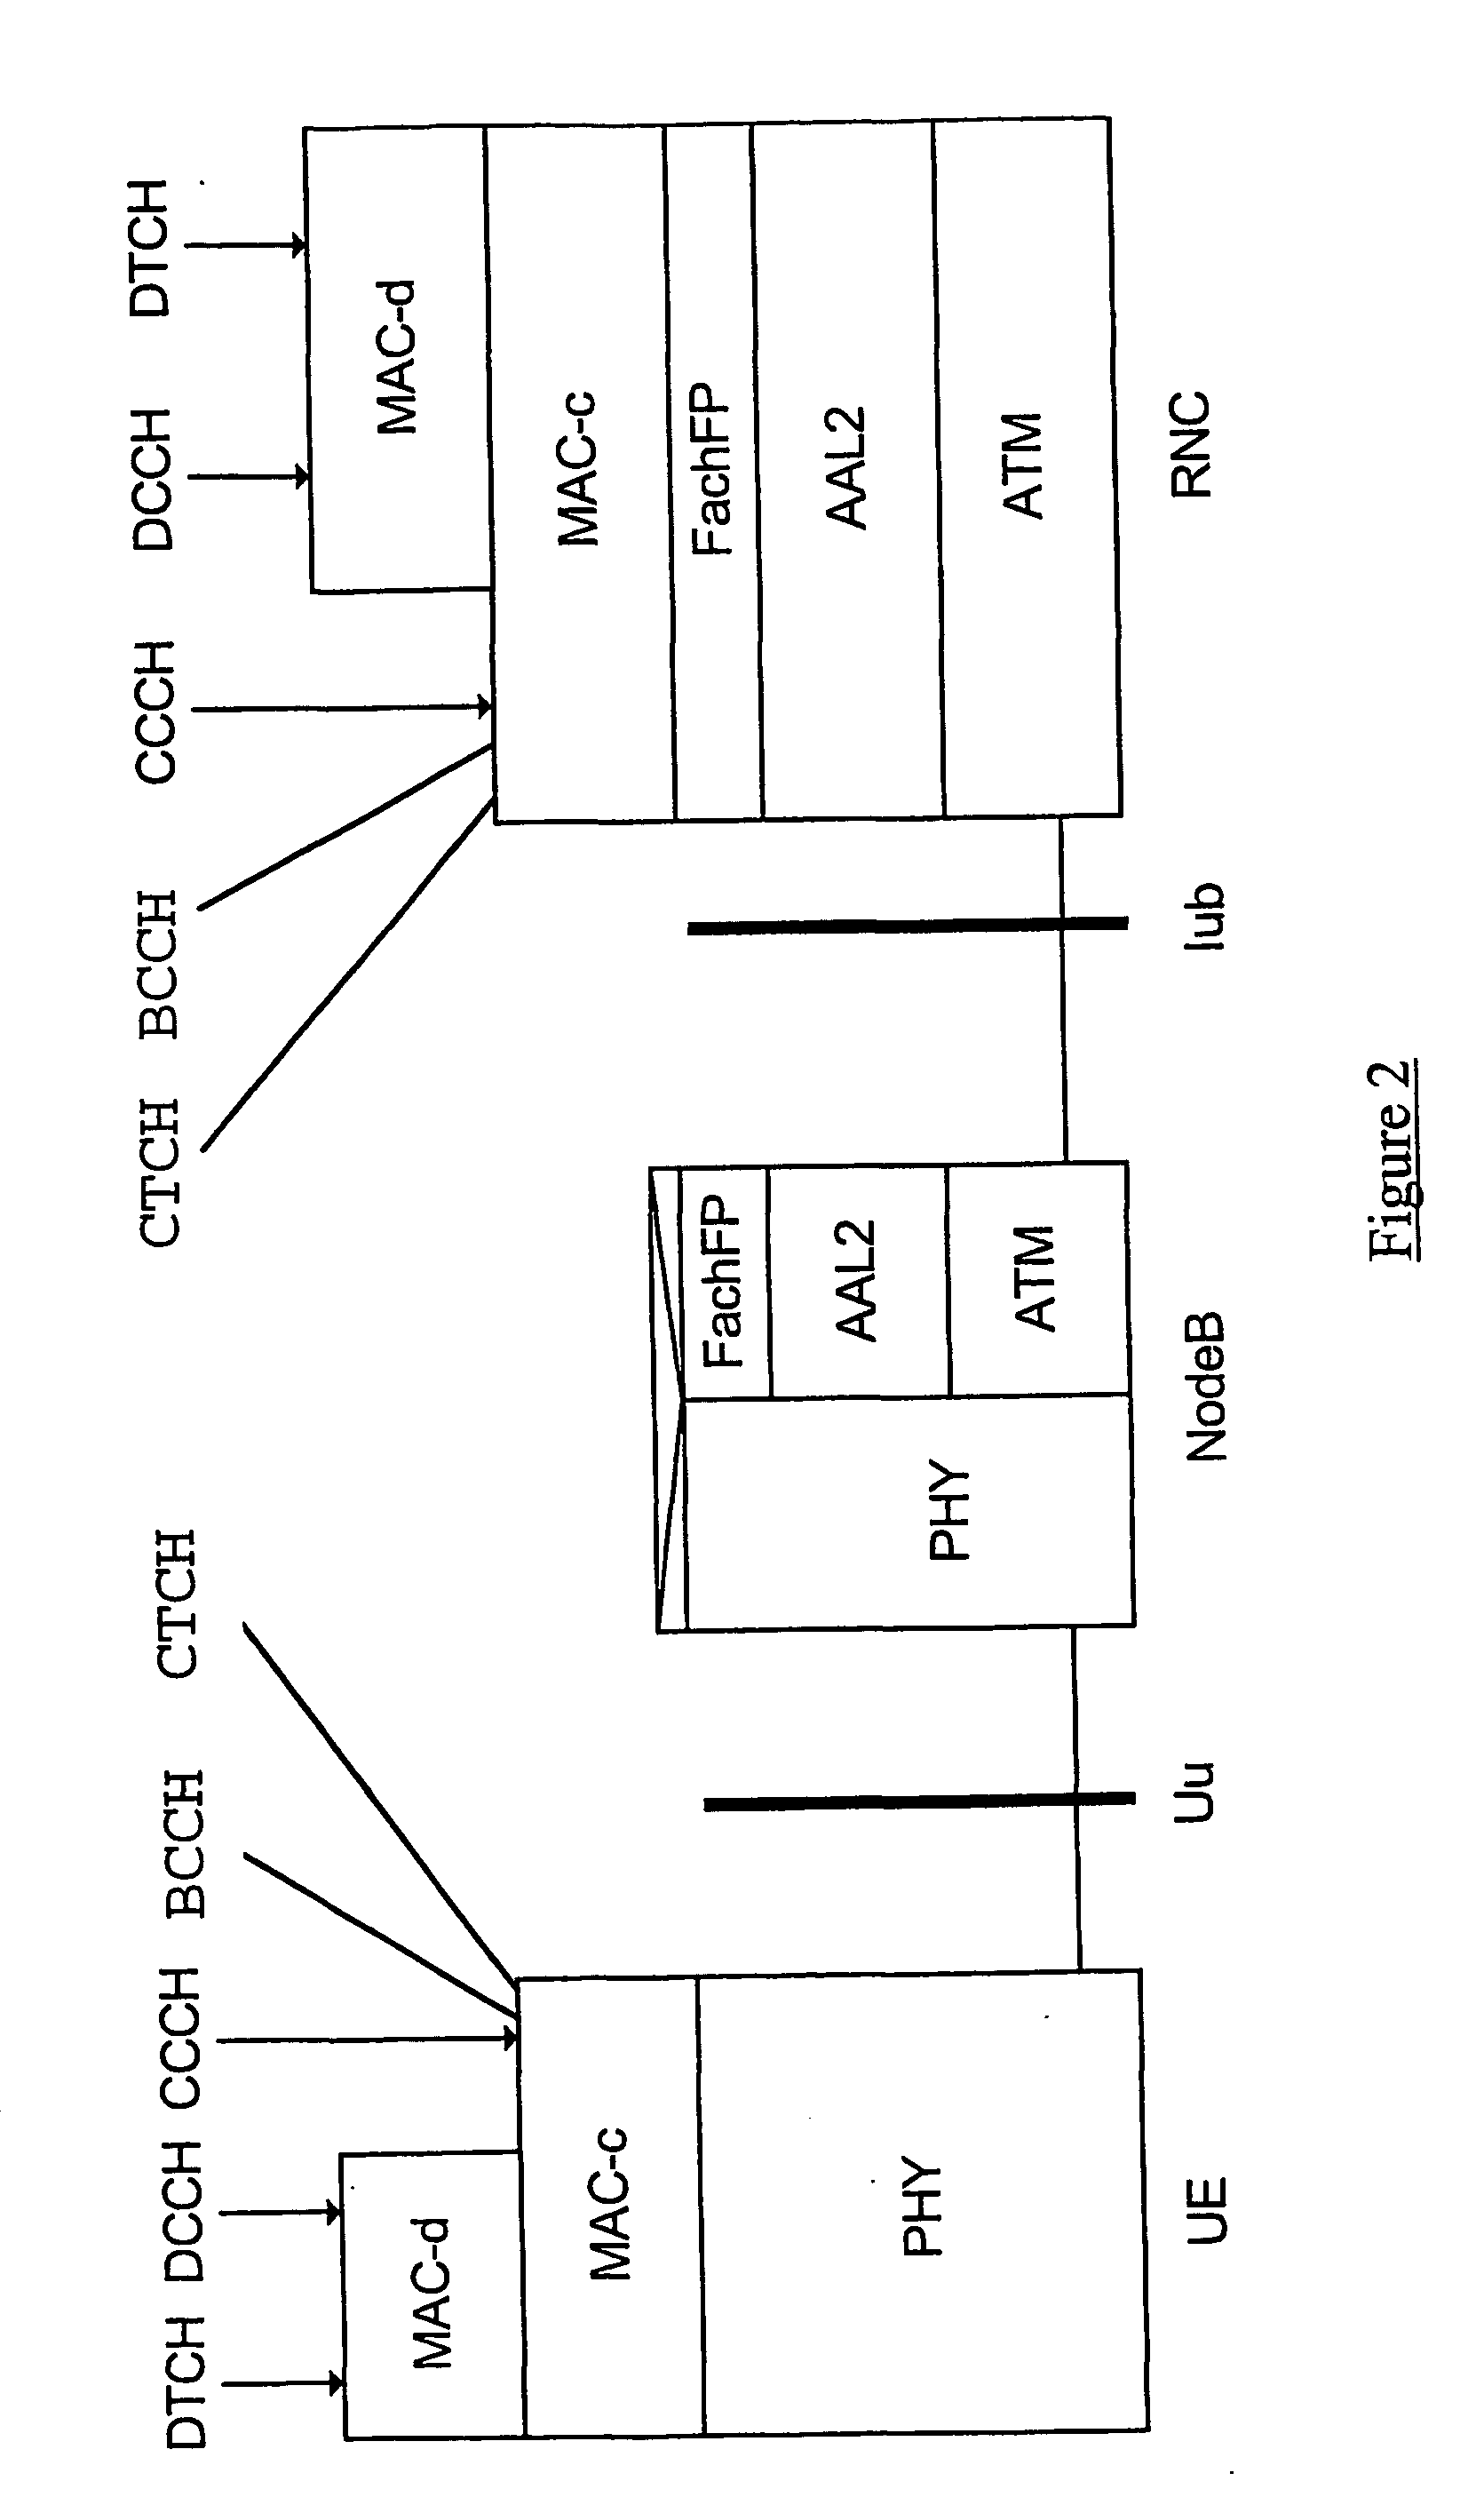 Controlling channel switching in a umts network